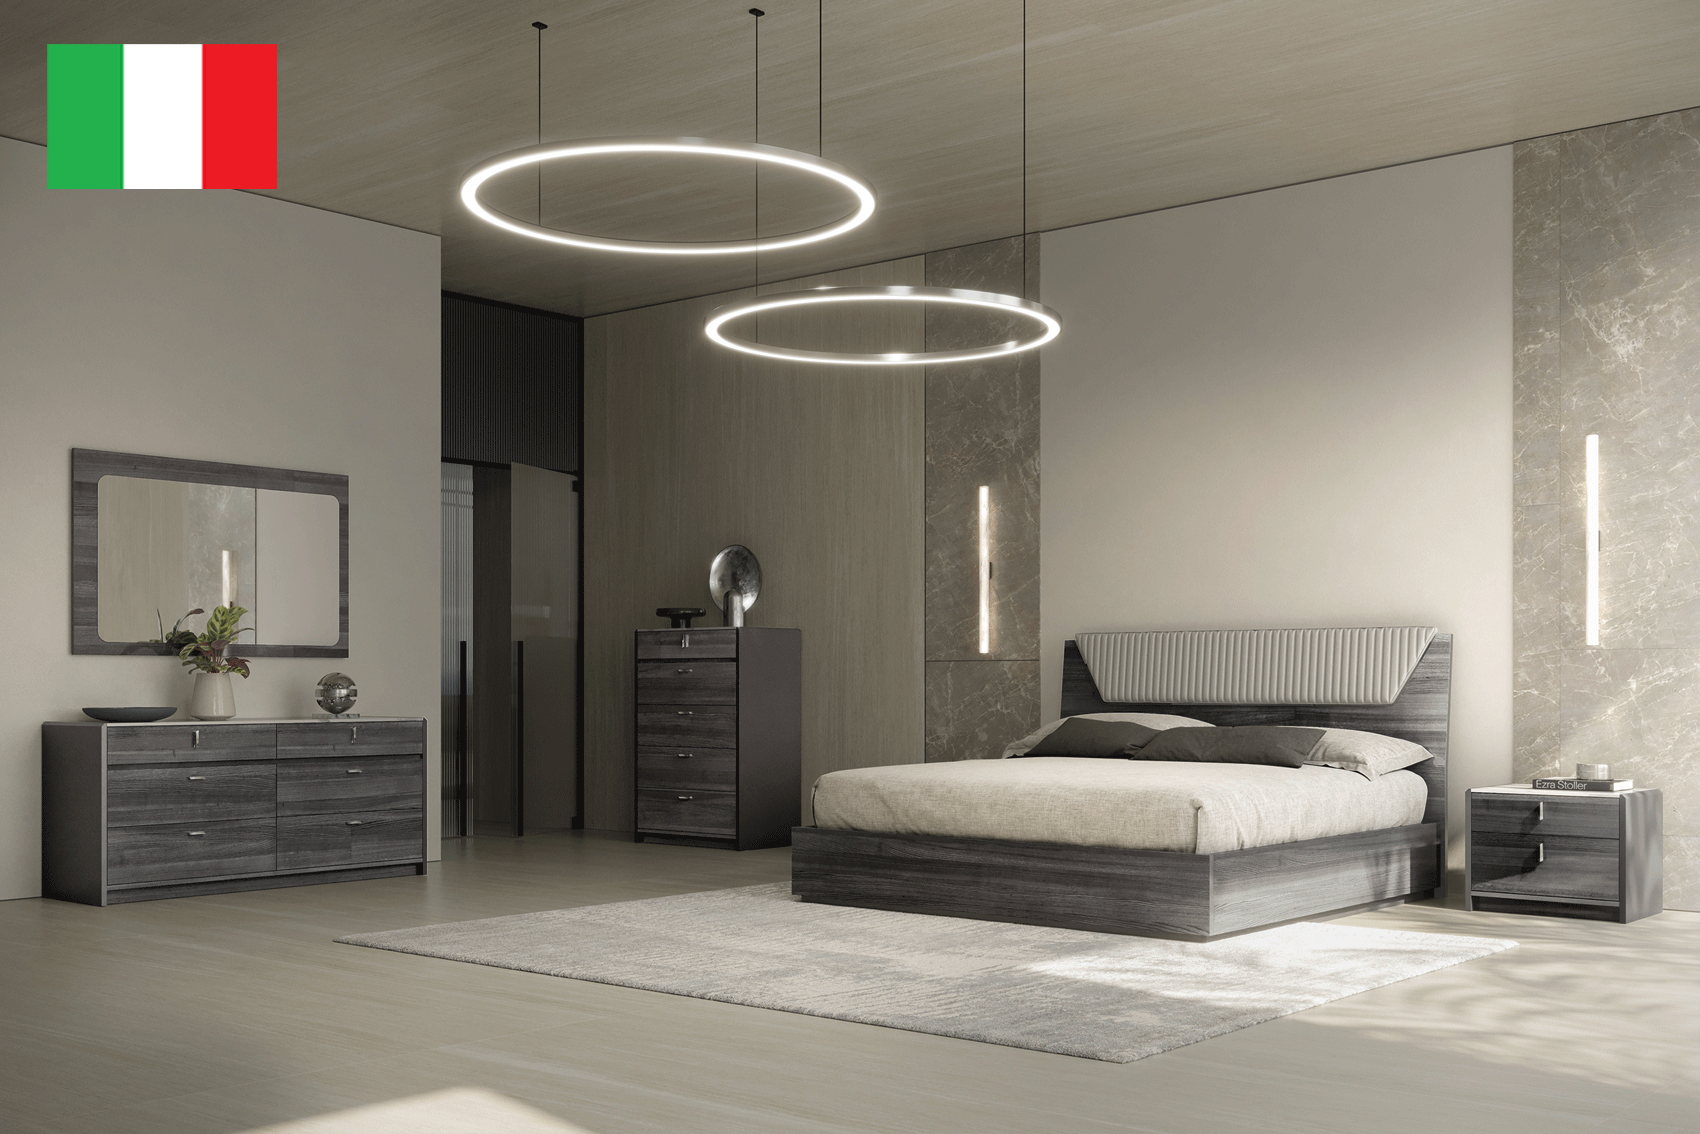 Bedroom Furniture Beds Vulcano Bedroom Set by Tomasella, Italy